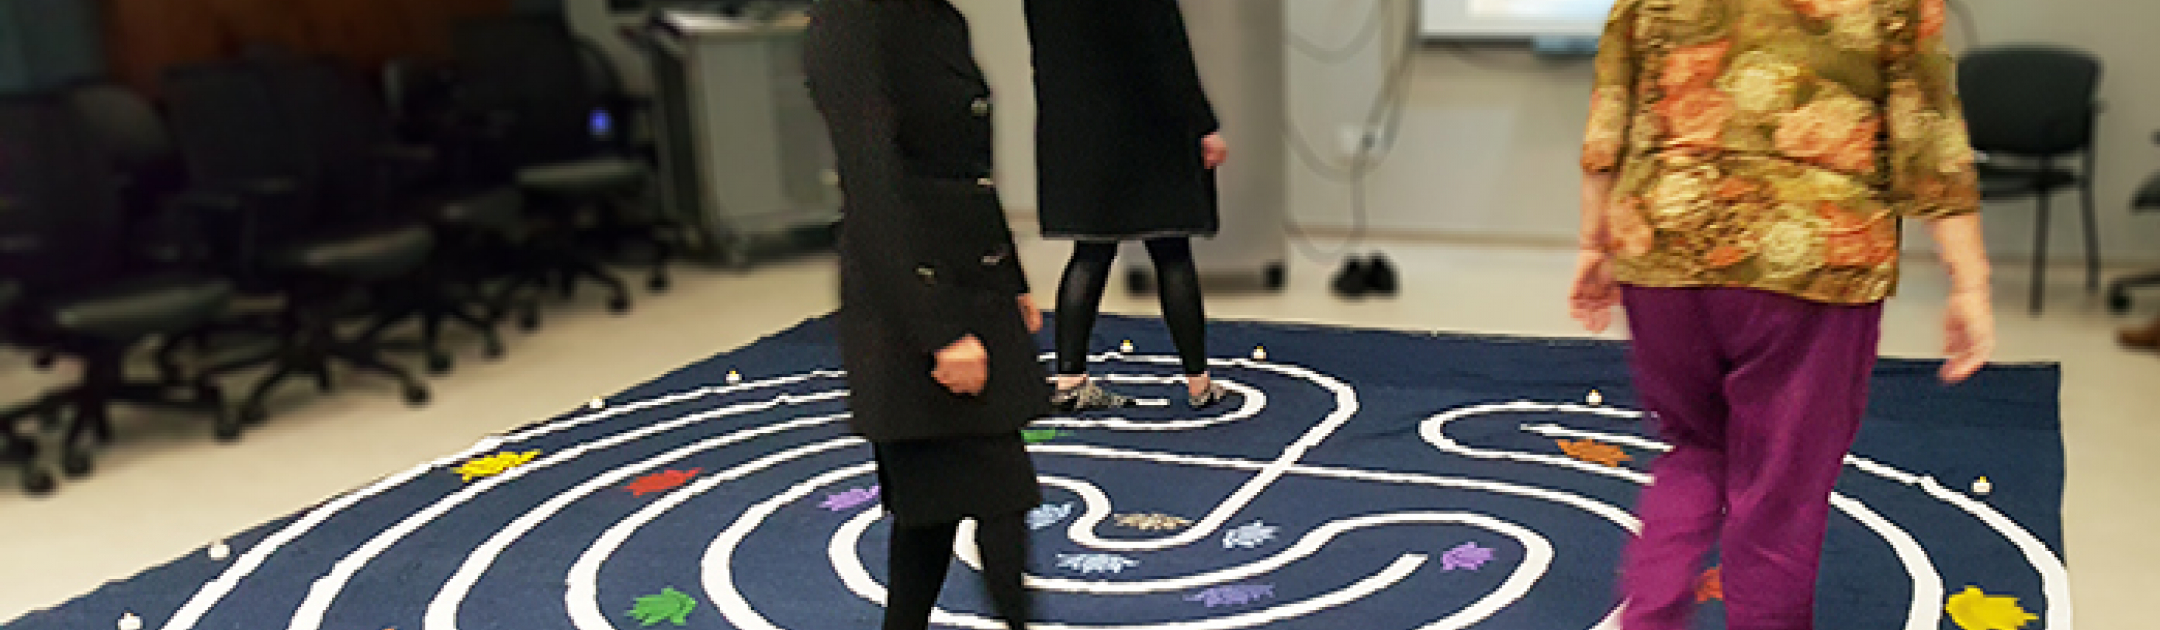 Attendees participating in a labyrinth walk.